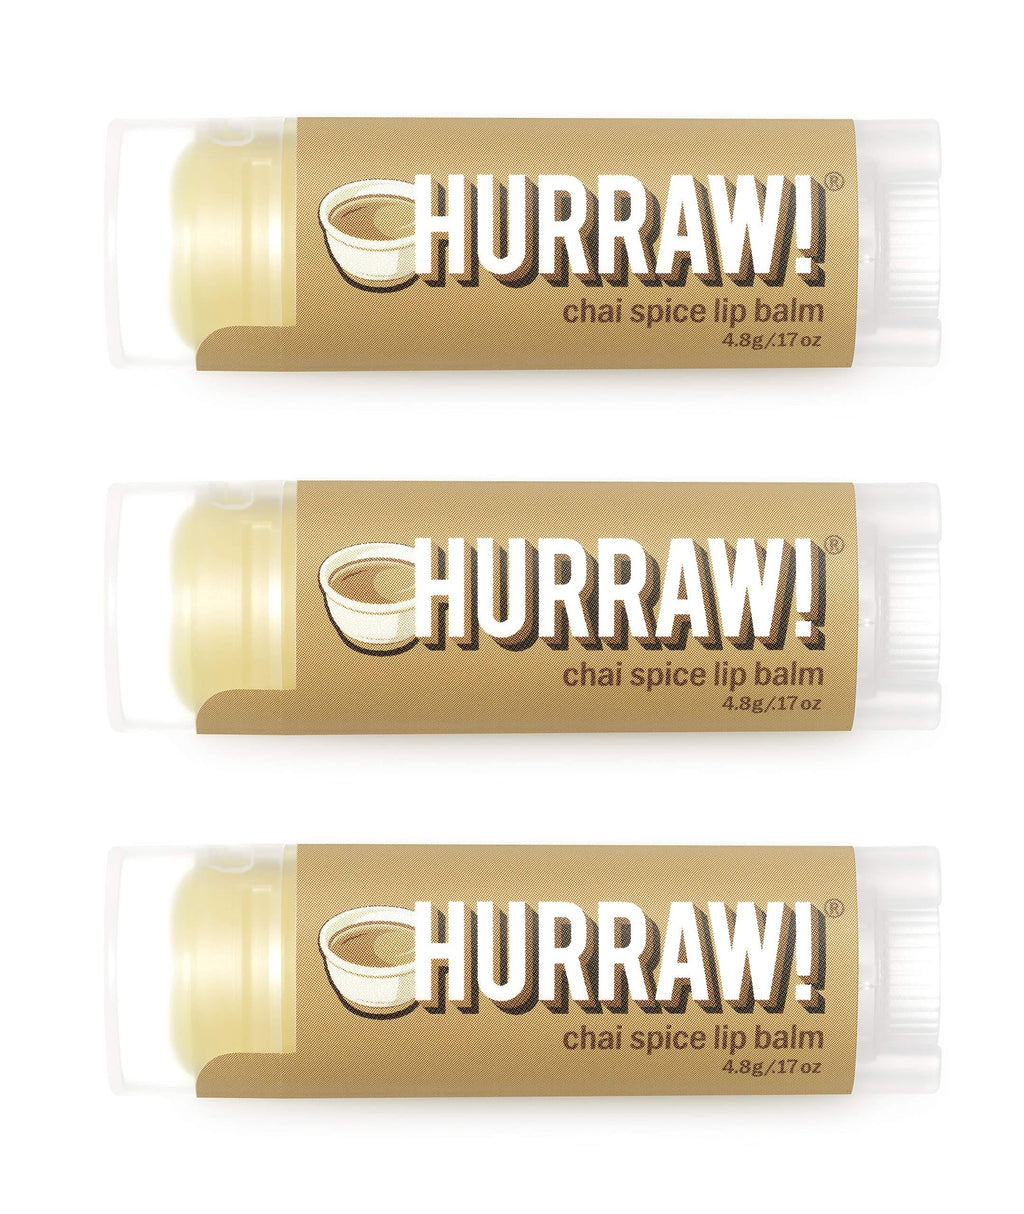 Hurraw! Chai Spice Lip Balm, 3 Pack: Organic, Certified Vegan, Cruelty and Gluten Free. Non-GMO, 100% Natural Ingredients. Bee, Shea, Soy and Palm Free. Made in USA - BeesActive Australia